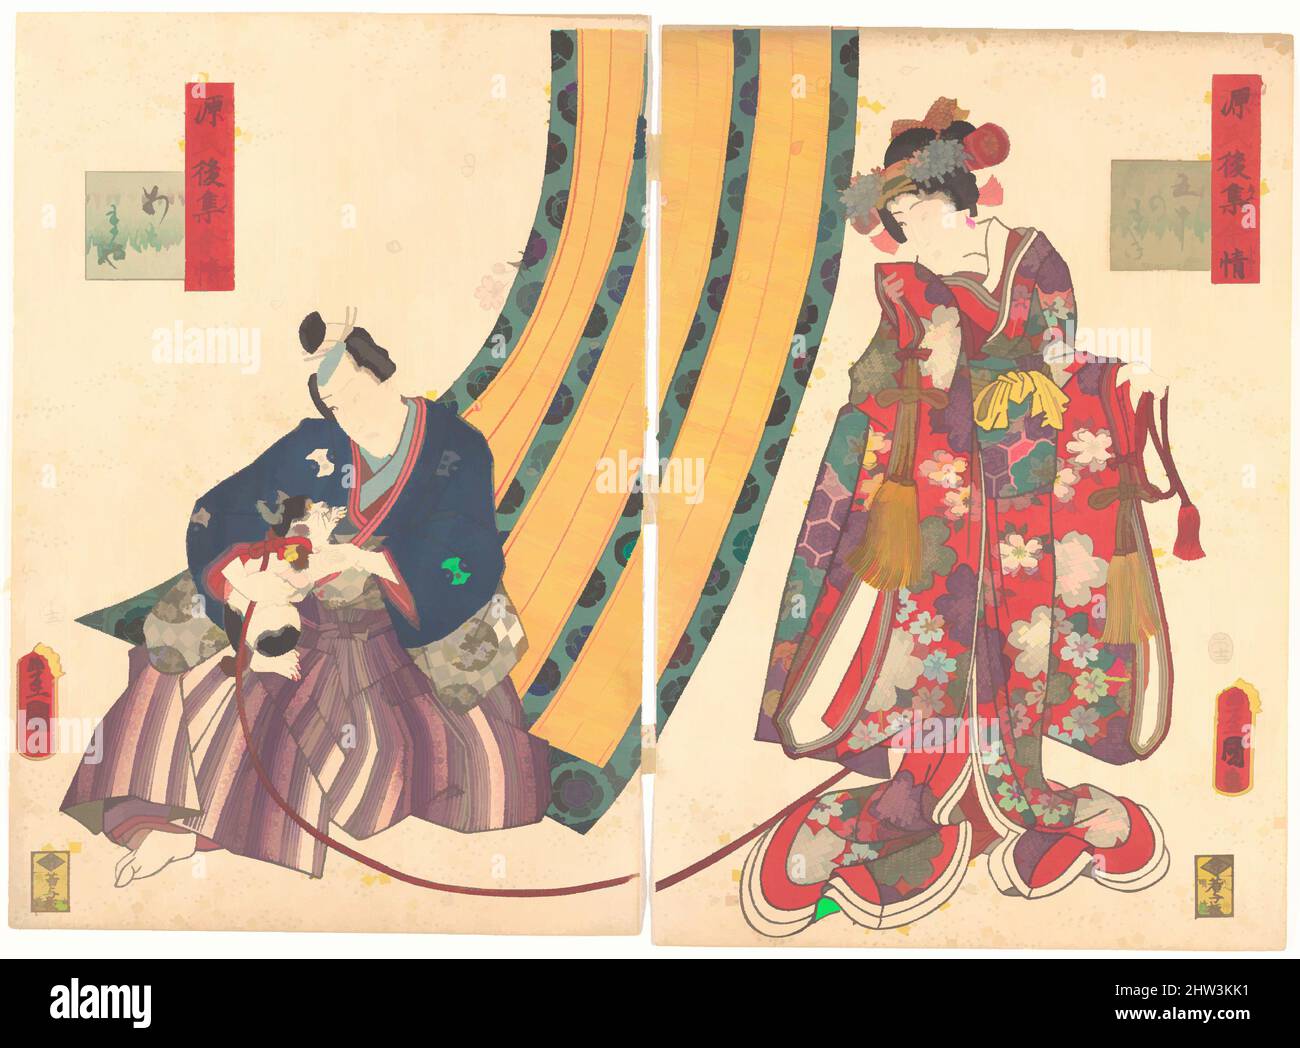 Art inspired by The Third Princess and Kashiwagi, from the Tale of Genji (Genji monogatari), 1858, Japan, Diptych of polychrome woodblock prints; ink and color on paper, Each 14 1/4 x 9 3/4 in. (36.2 x 24.8 cm), Prints, Utagawa Kunisada (Japanese, 1786–1865), One of the ukiyo-e artists, Classic works modernized by Artotop with a splash of modernity. Shapes, color and value, eye-catching visual impact on art. Emotions through freedom of artworks in a contemporary way. A timeless message pursuing a wildly creative new direction. Artists turning to the digital medium and creating the Artotop NFT Stock Photo